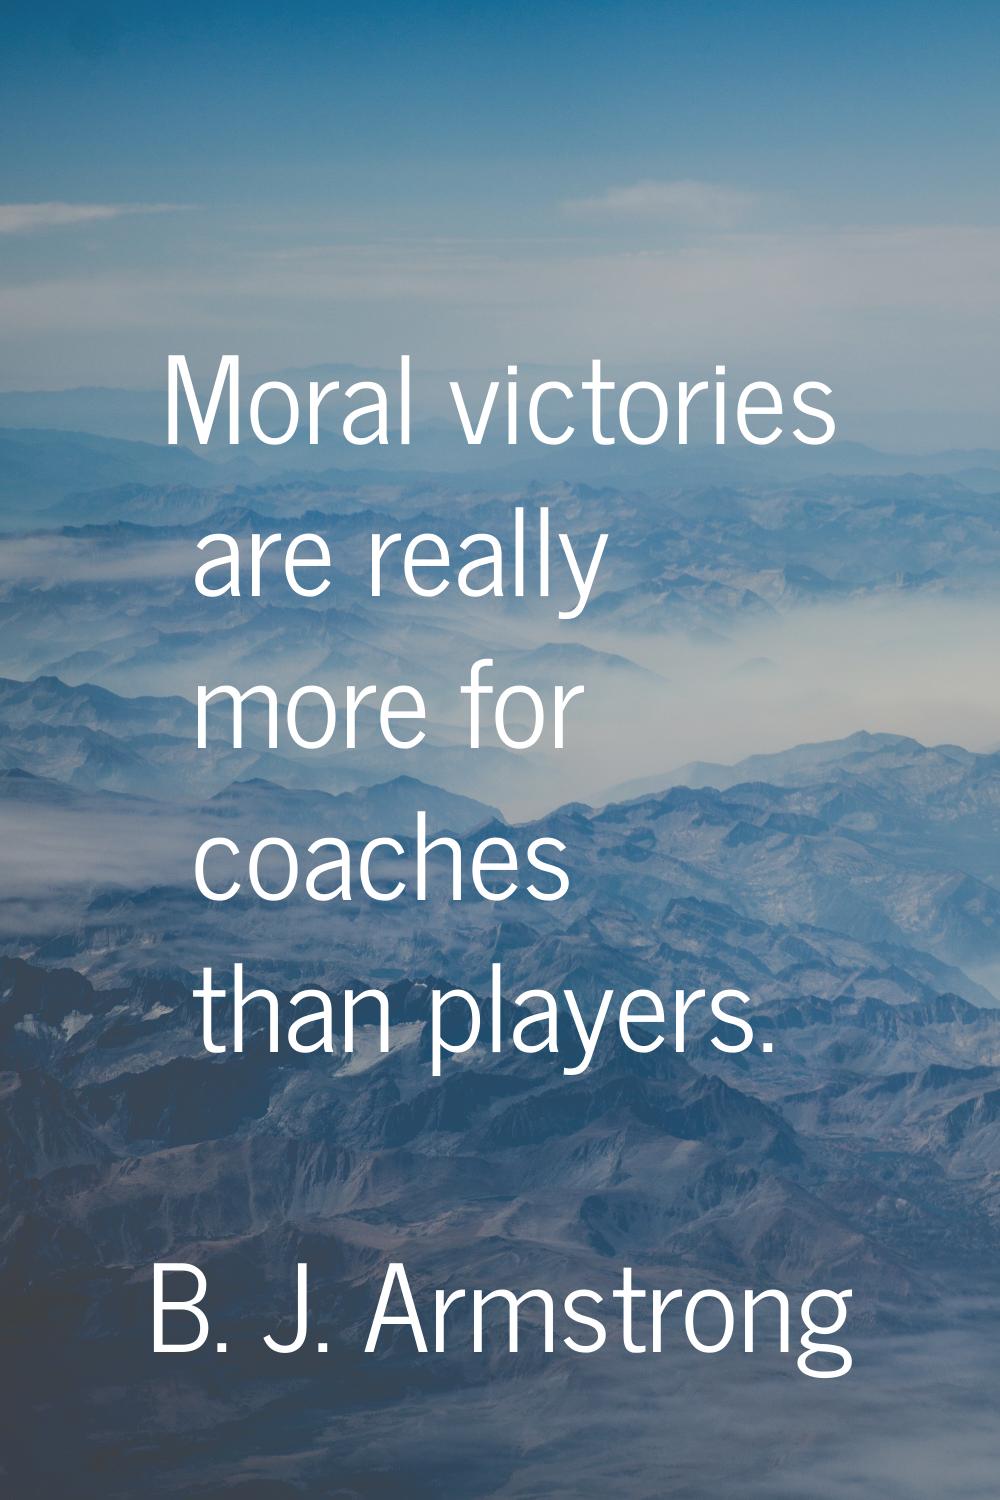 Moral victories are really more for coaches than players.